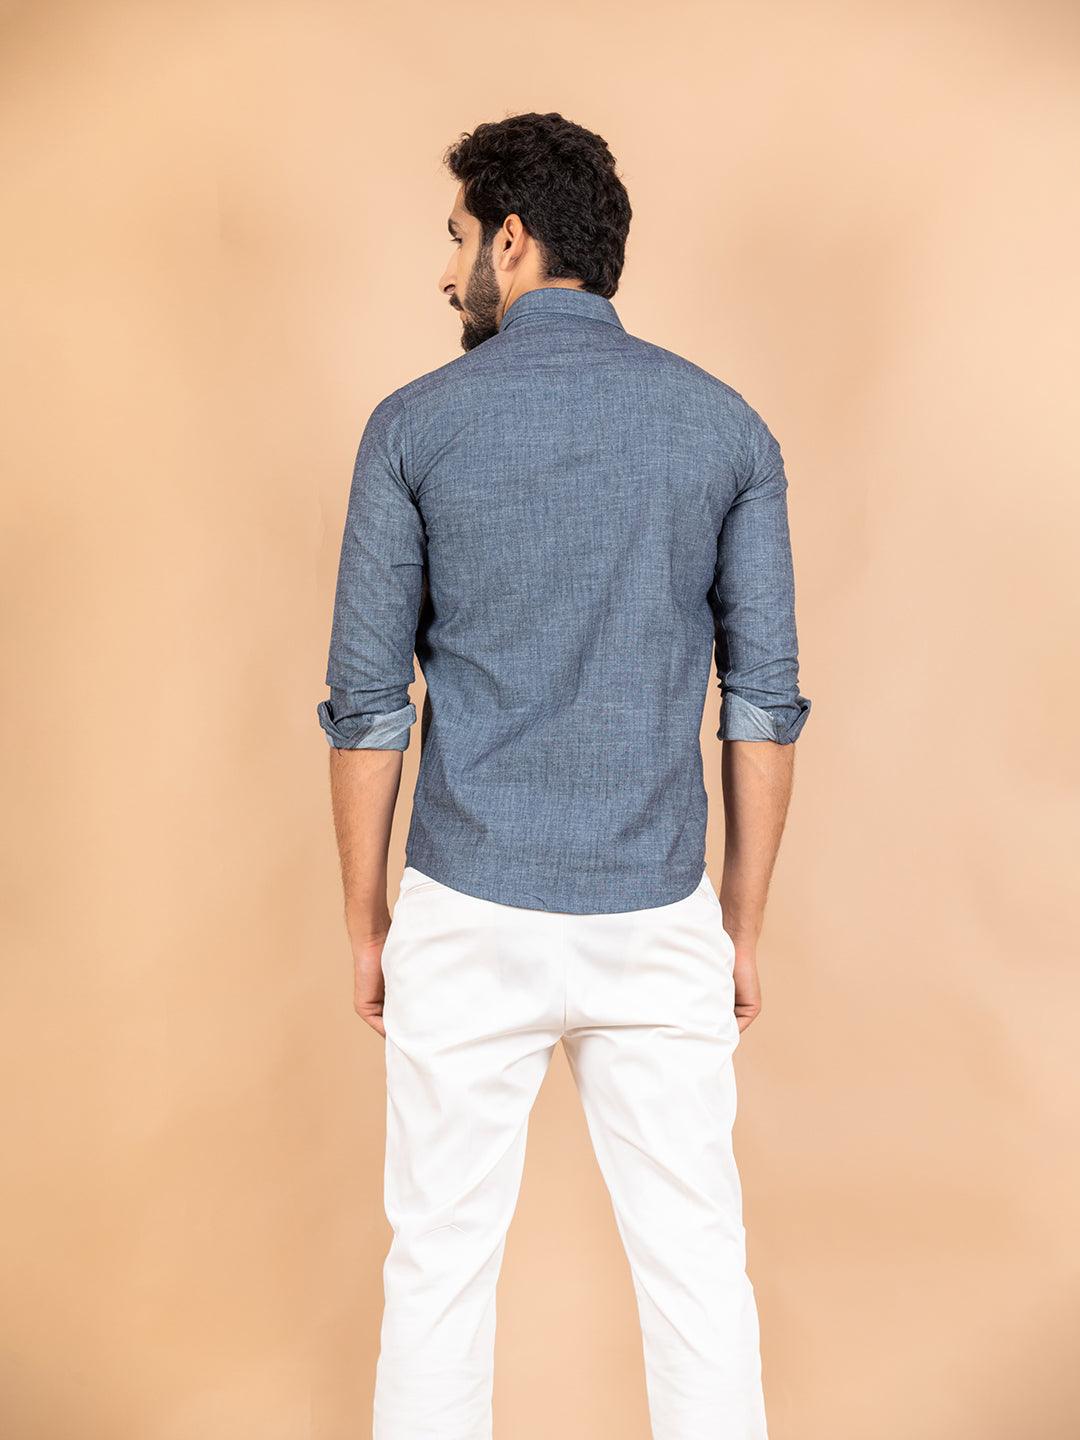 A cute boy by the white wall, grey shirt, blues jeans full size 3107011  Stock Photo at Vecteezy